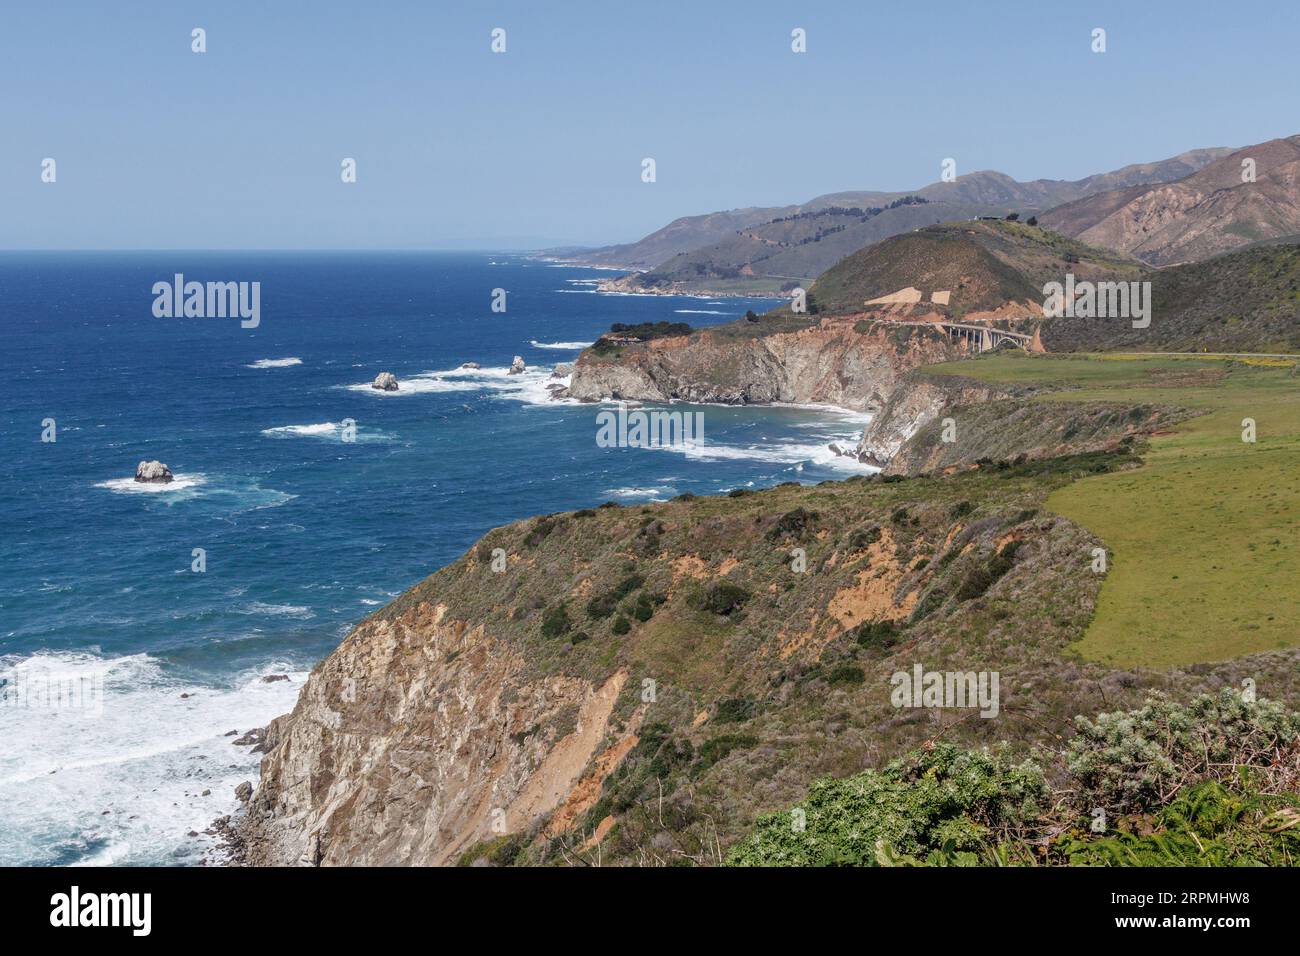 View from Hurricane Point View to Castle Rock Viewpoint, Ocean Road M1, Highway 1, USA, California, Monterey Stock Photo